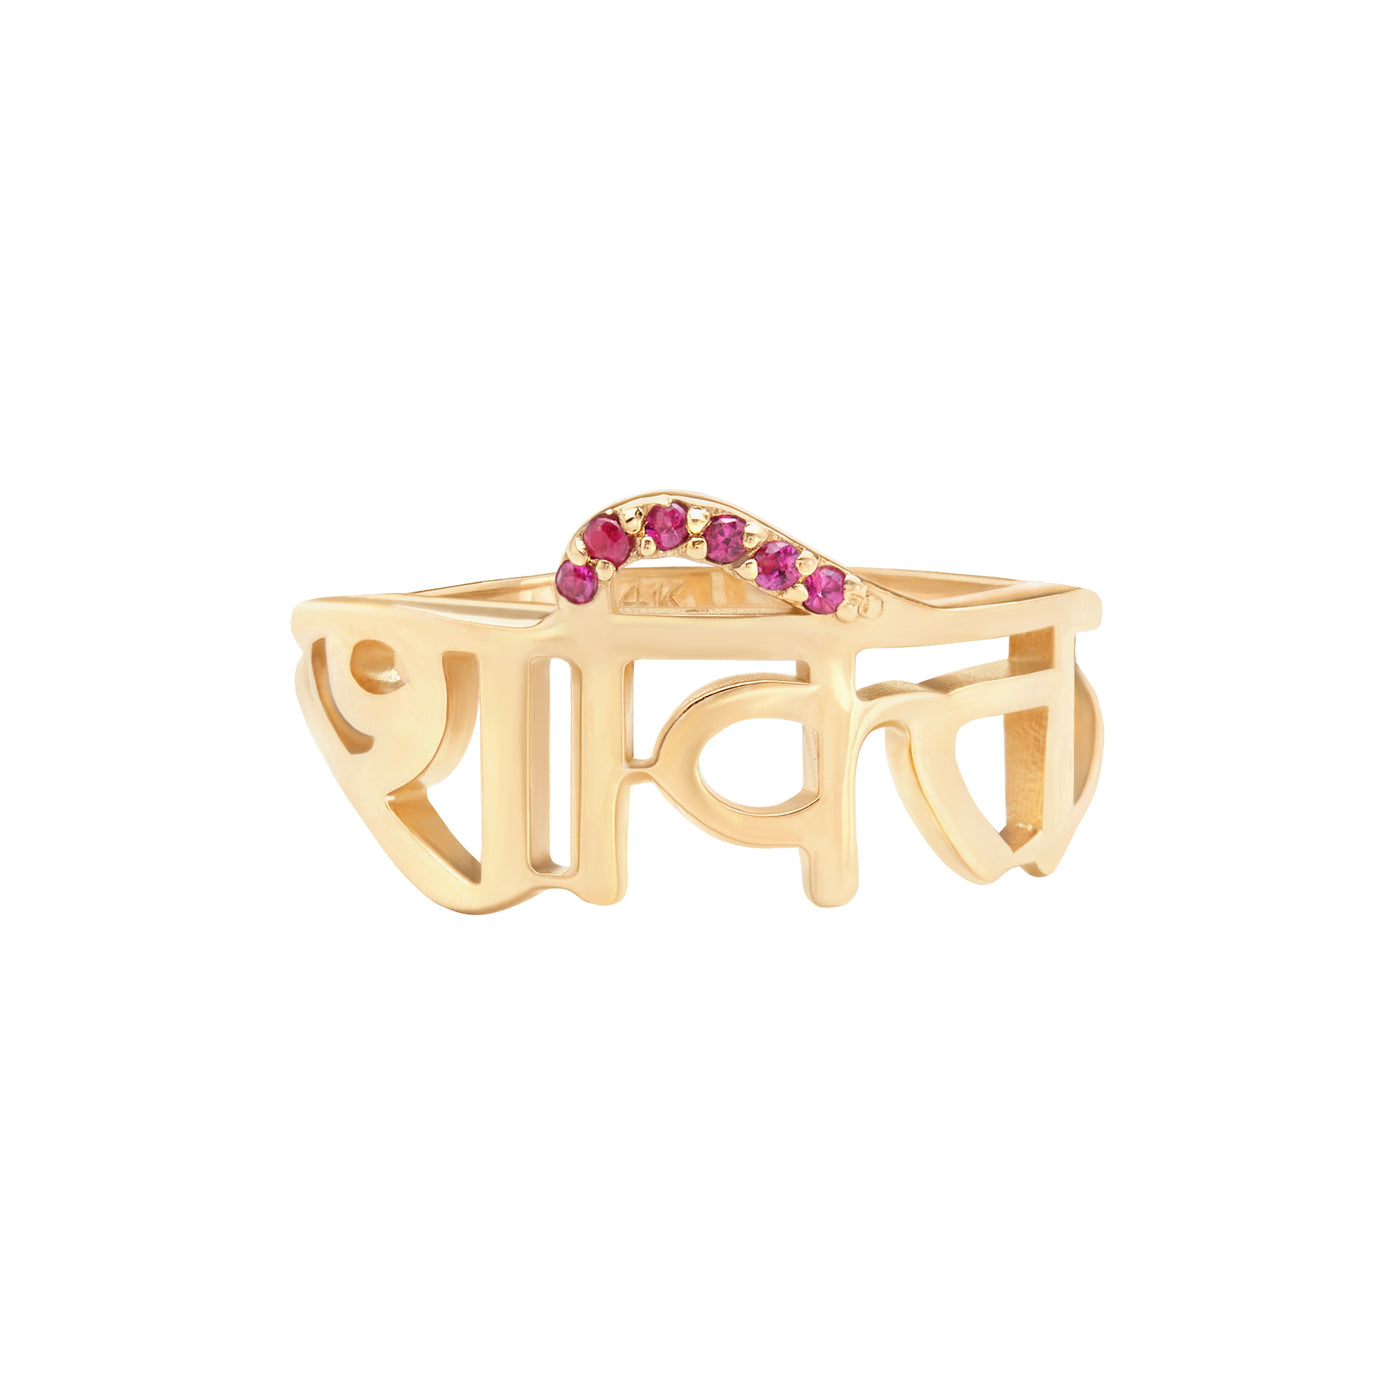 14 Karat Yellow Gold Ring That says Shakti-Stength with Ruby Detail Against White Background